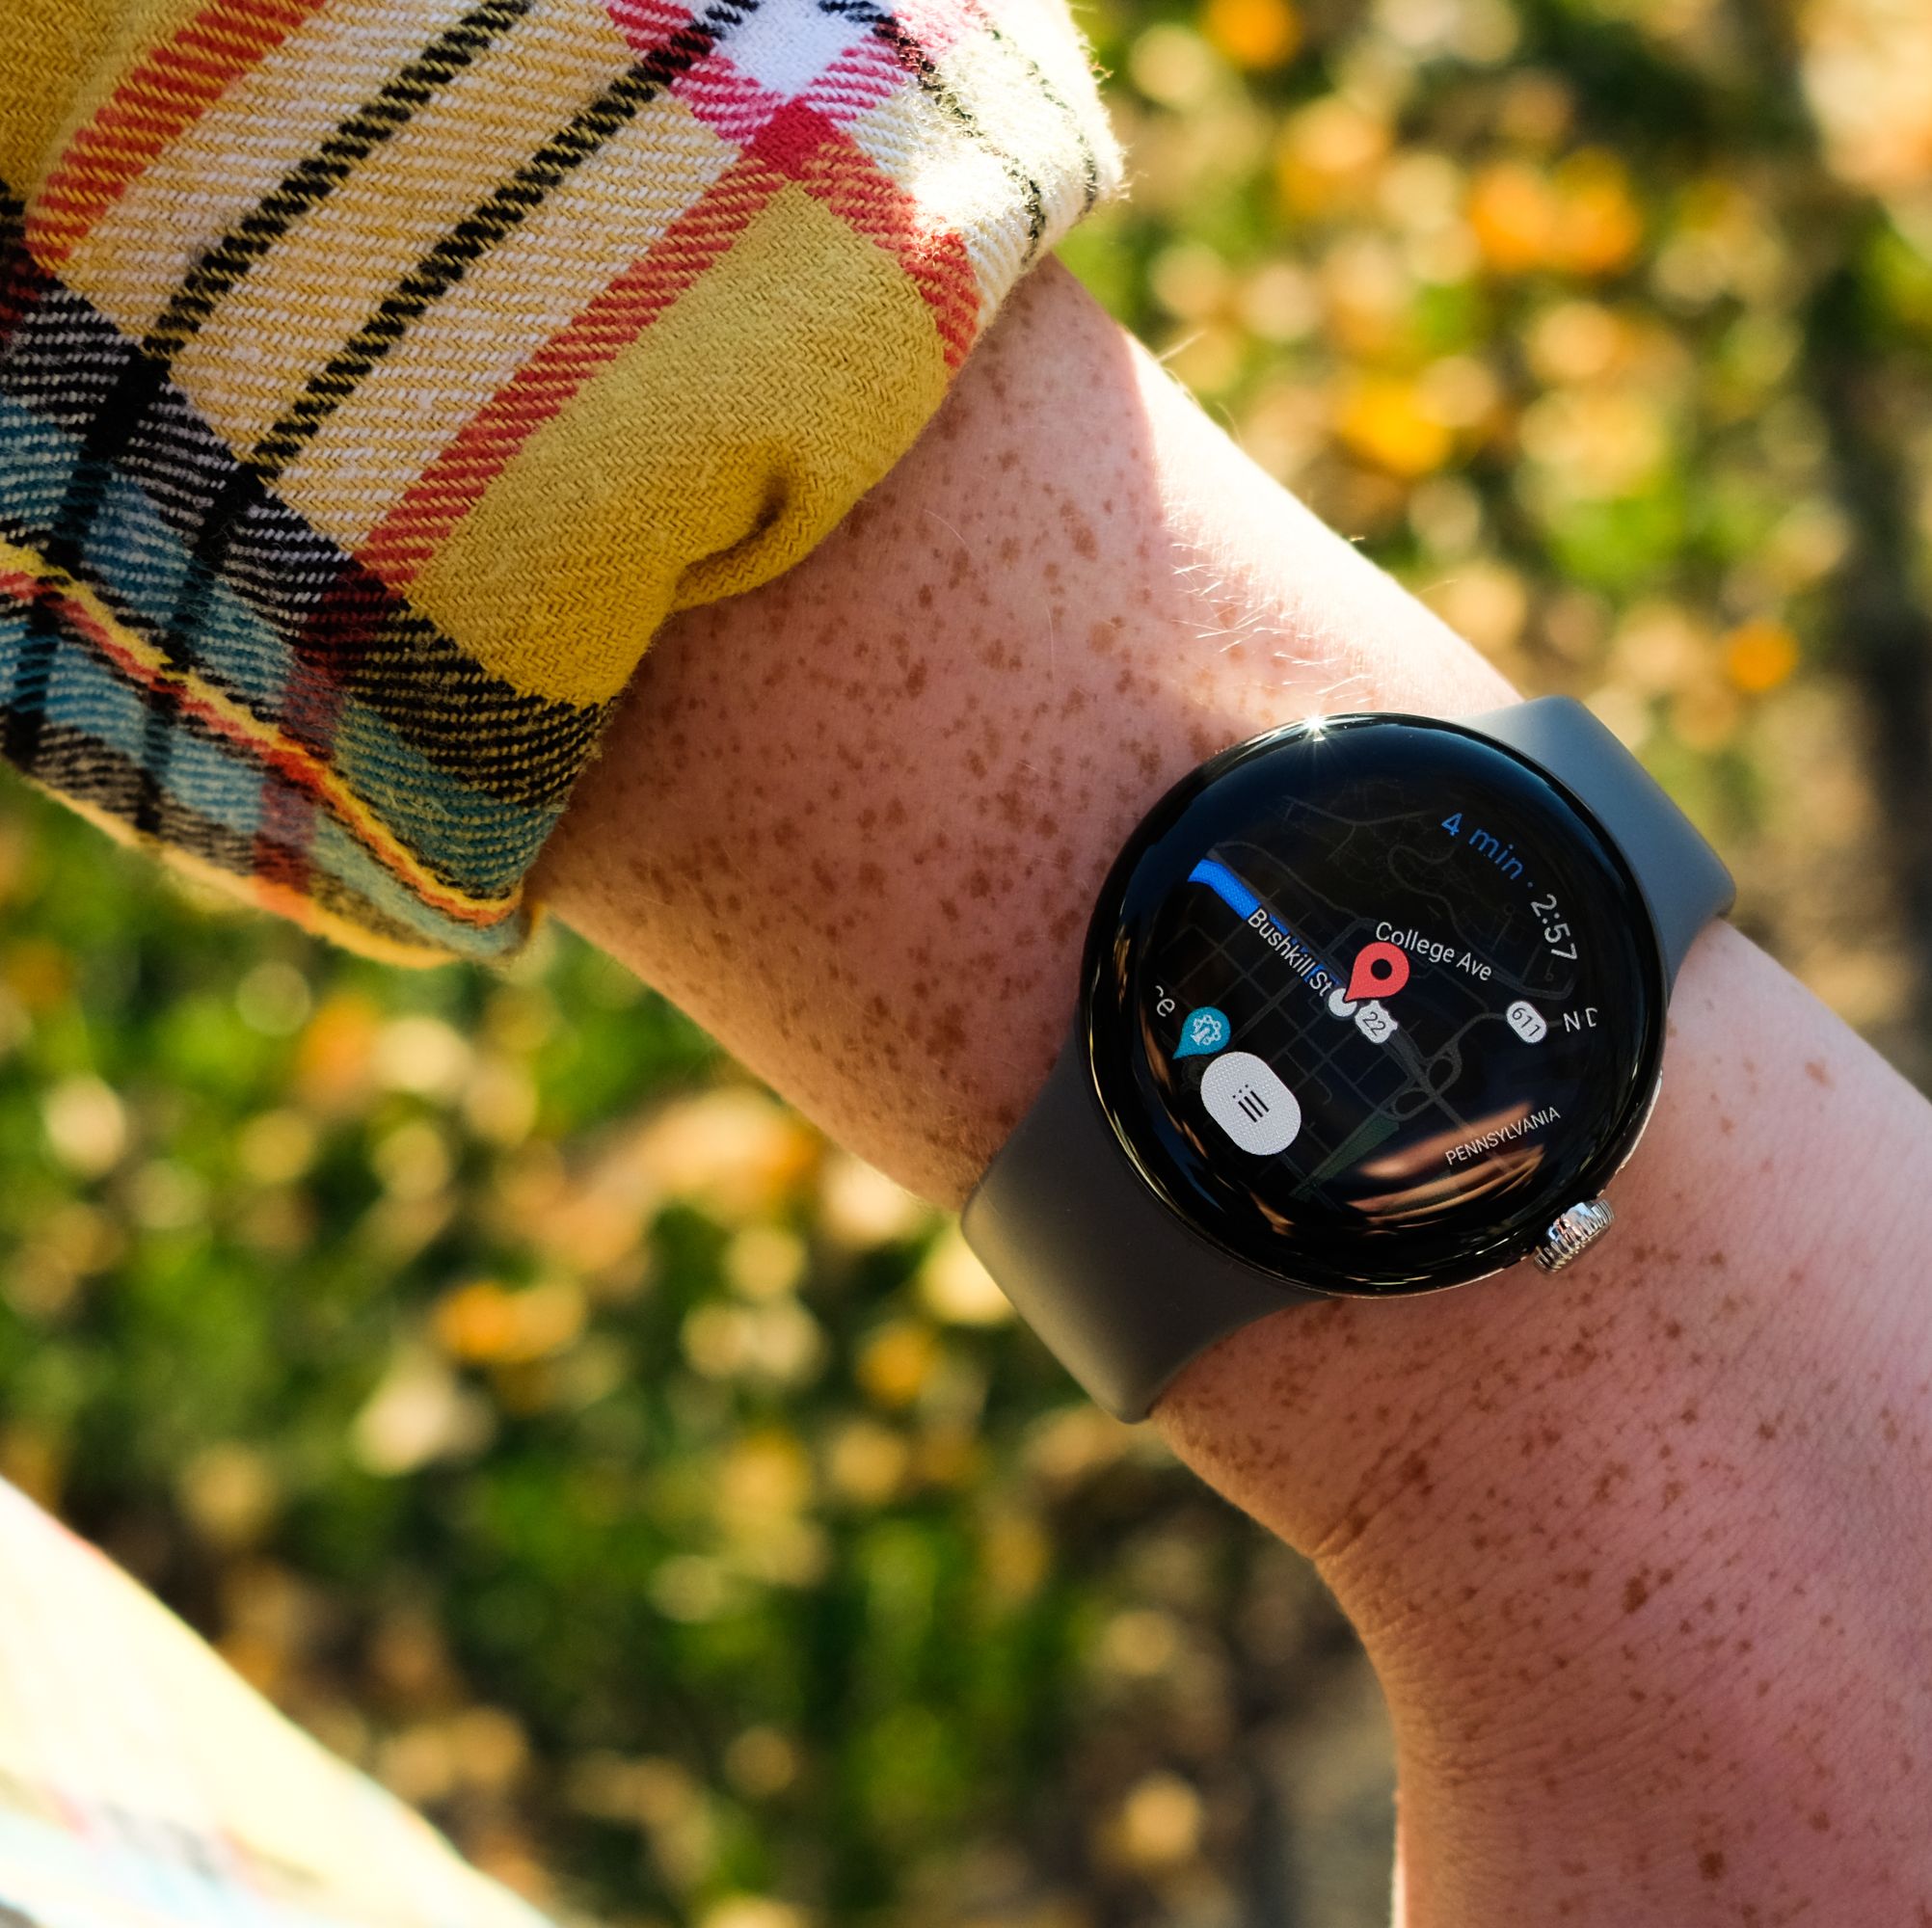 The Pixel Watch Is Android's Premier Smart Watch—But Lags Behind Apple Watch